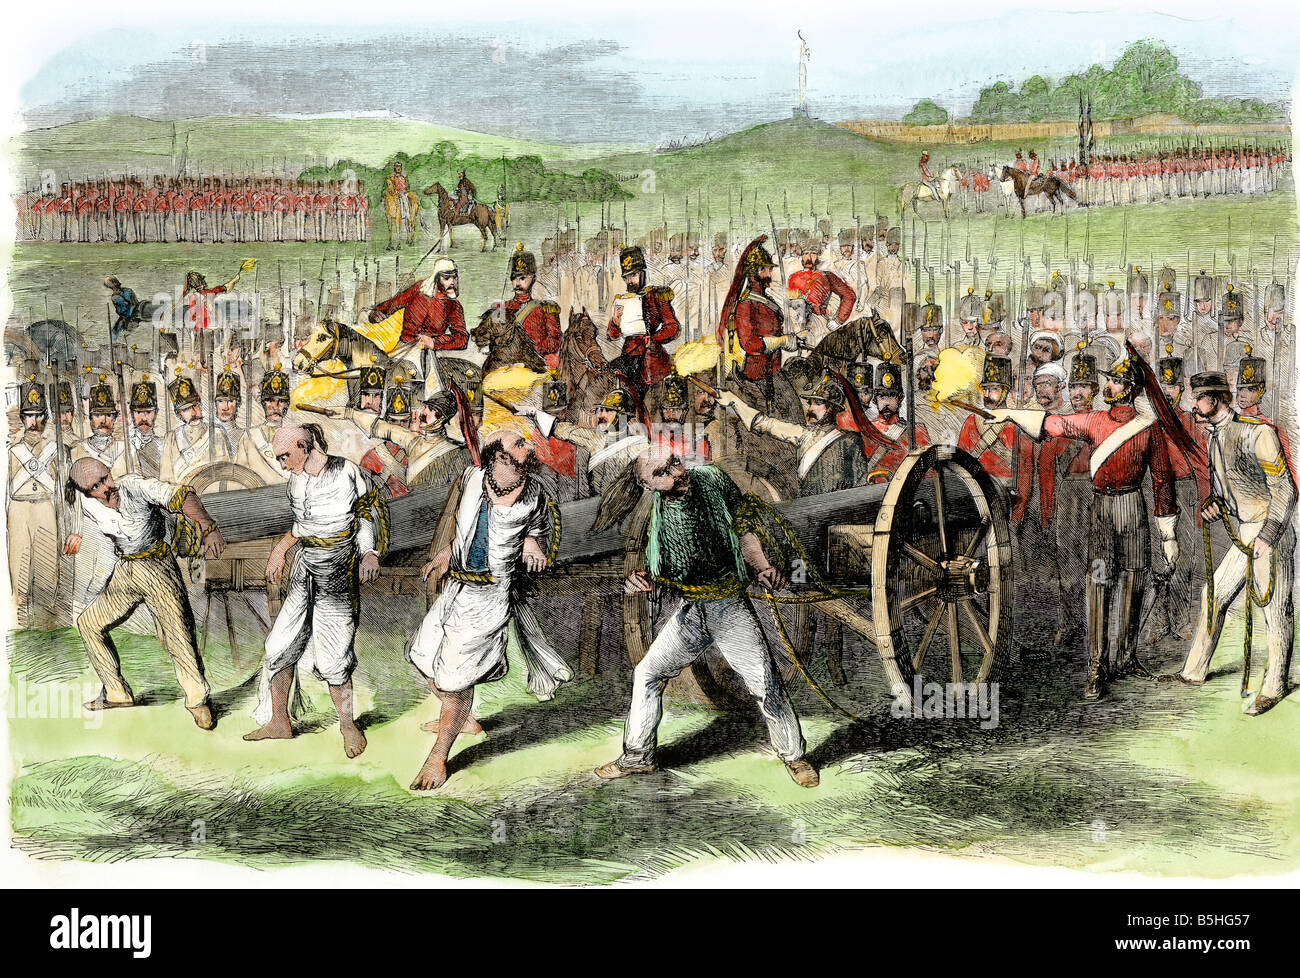 British military executing Sepoys by tying them to cannons during the rebeliion in India 1857. Hand-colored woodcut Stock Photo